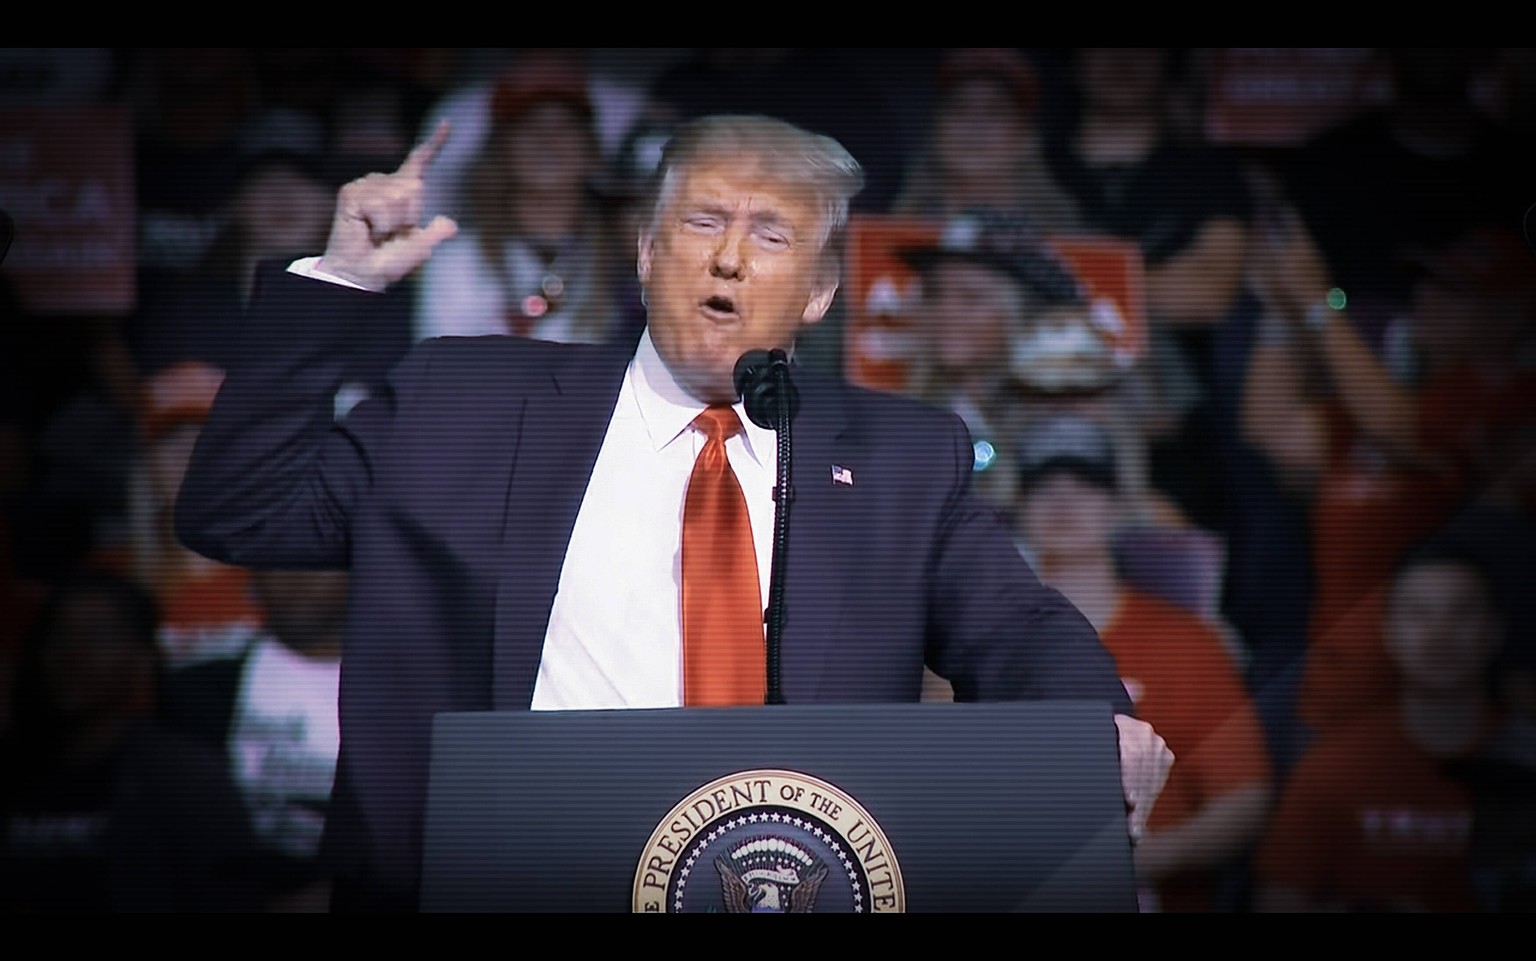 USA, Wahlkampfauftritt von Donald Trump in Tulsa DONALD TRUMP HOLDS MAGA RALLY IN TULSA, OKLAHOMA Donald Trump holds first rally since pandemic began, with empty seats and staff infections at Covid-19 ...